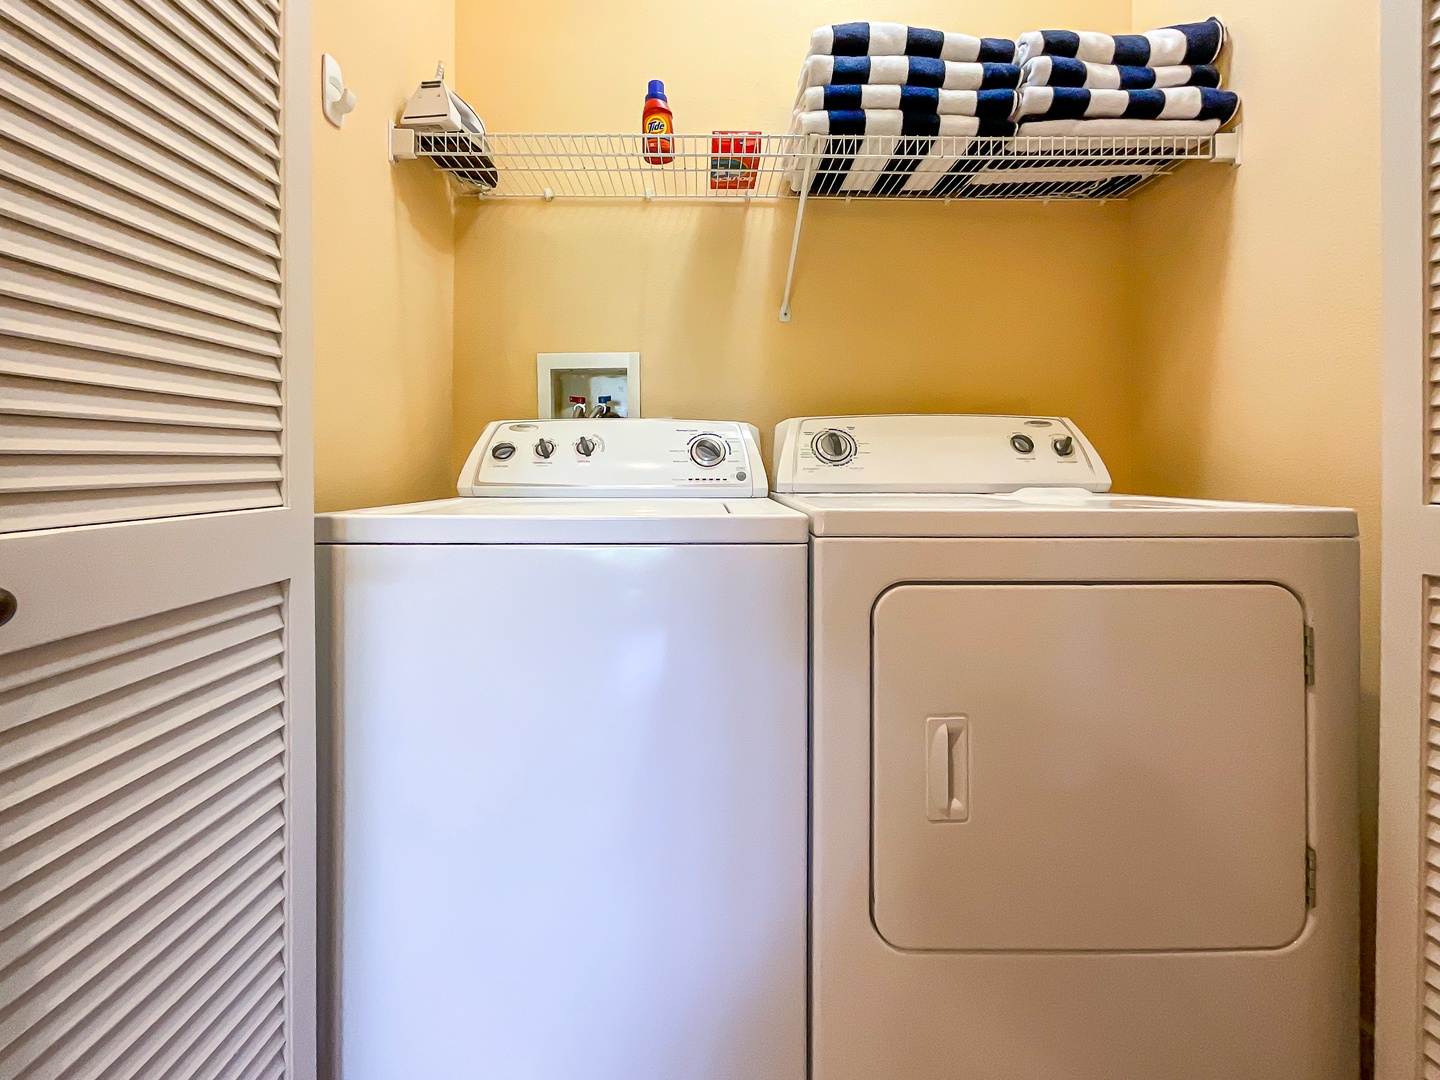 Kapolei Vacation Rentals, Coconut Plantation 1192-4 - The laundry area with washer and dyer.